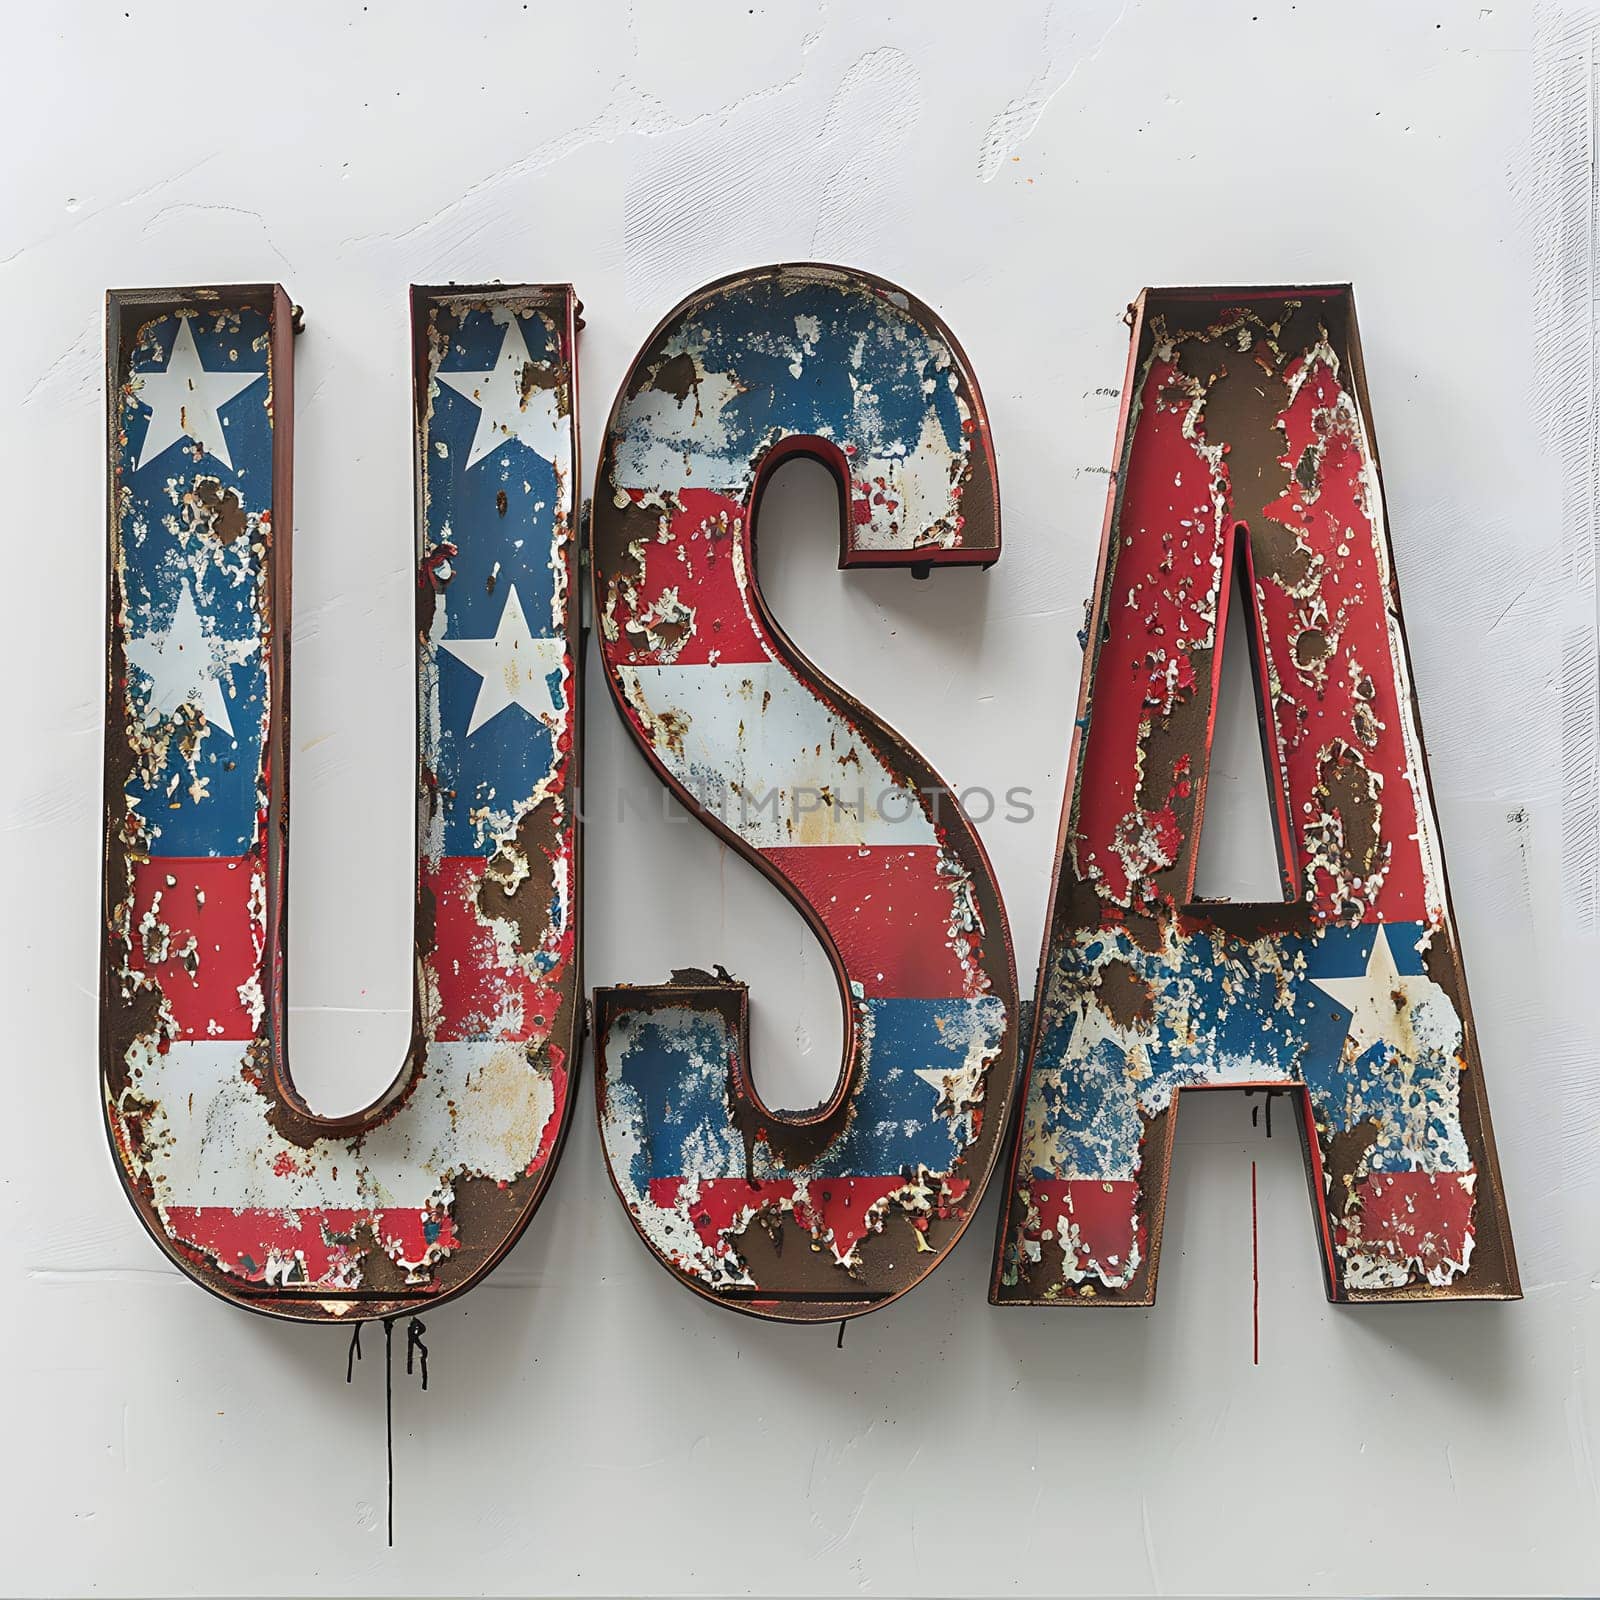 The word USA is displayed in a bold font on a rectangleshaped metal fashion accessory, painted in the vibrant colors of the American flag, symbolizing patriotism and artistry